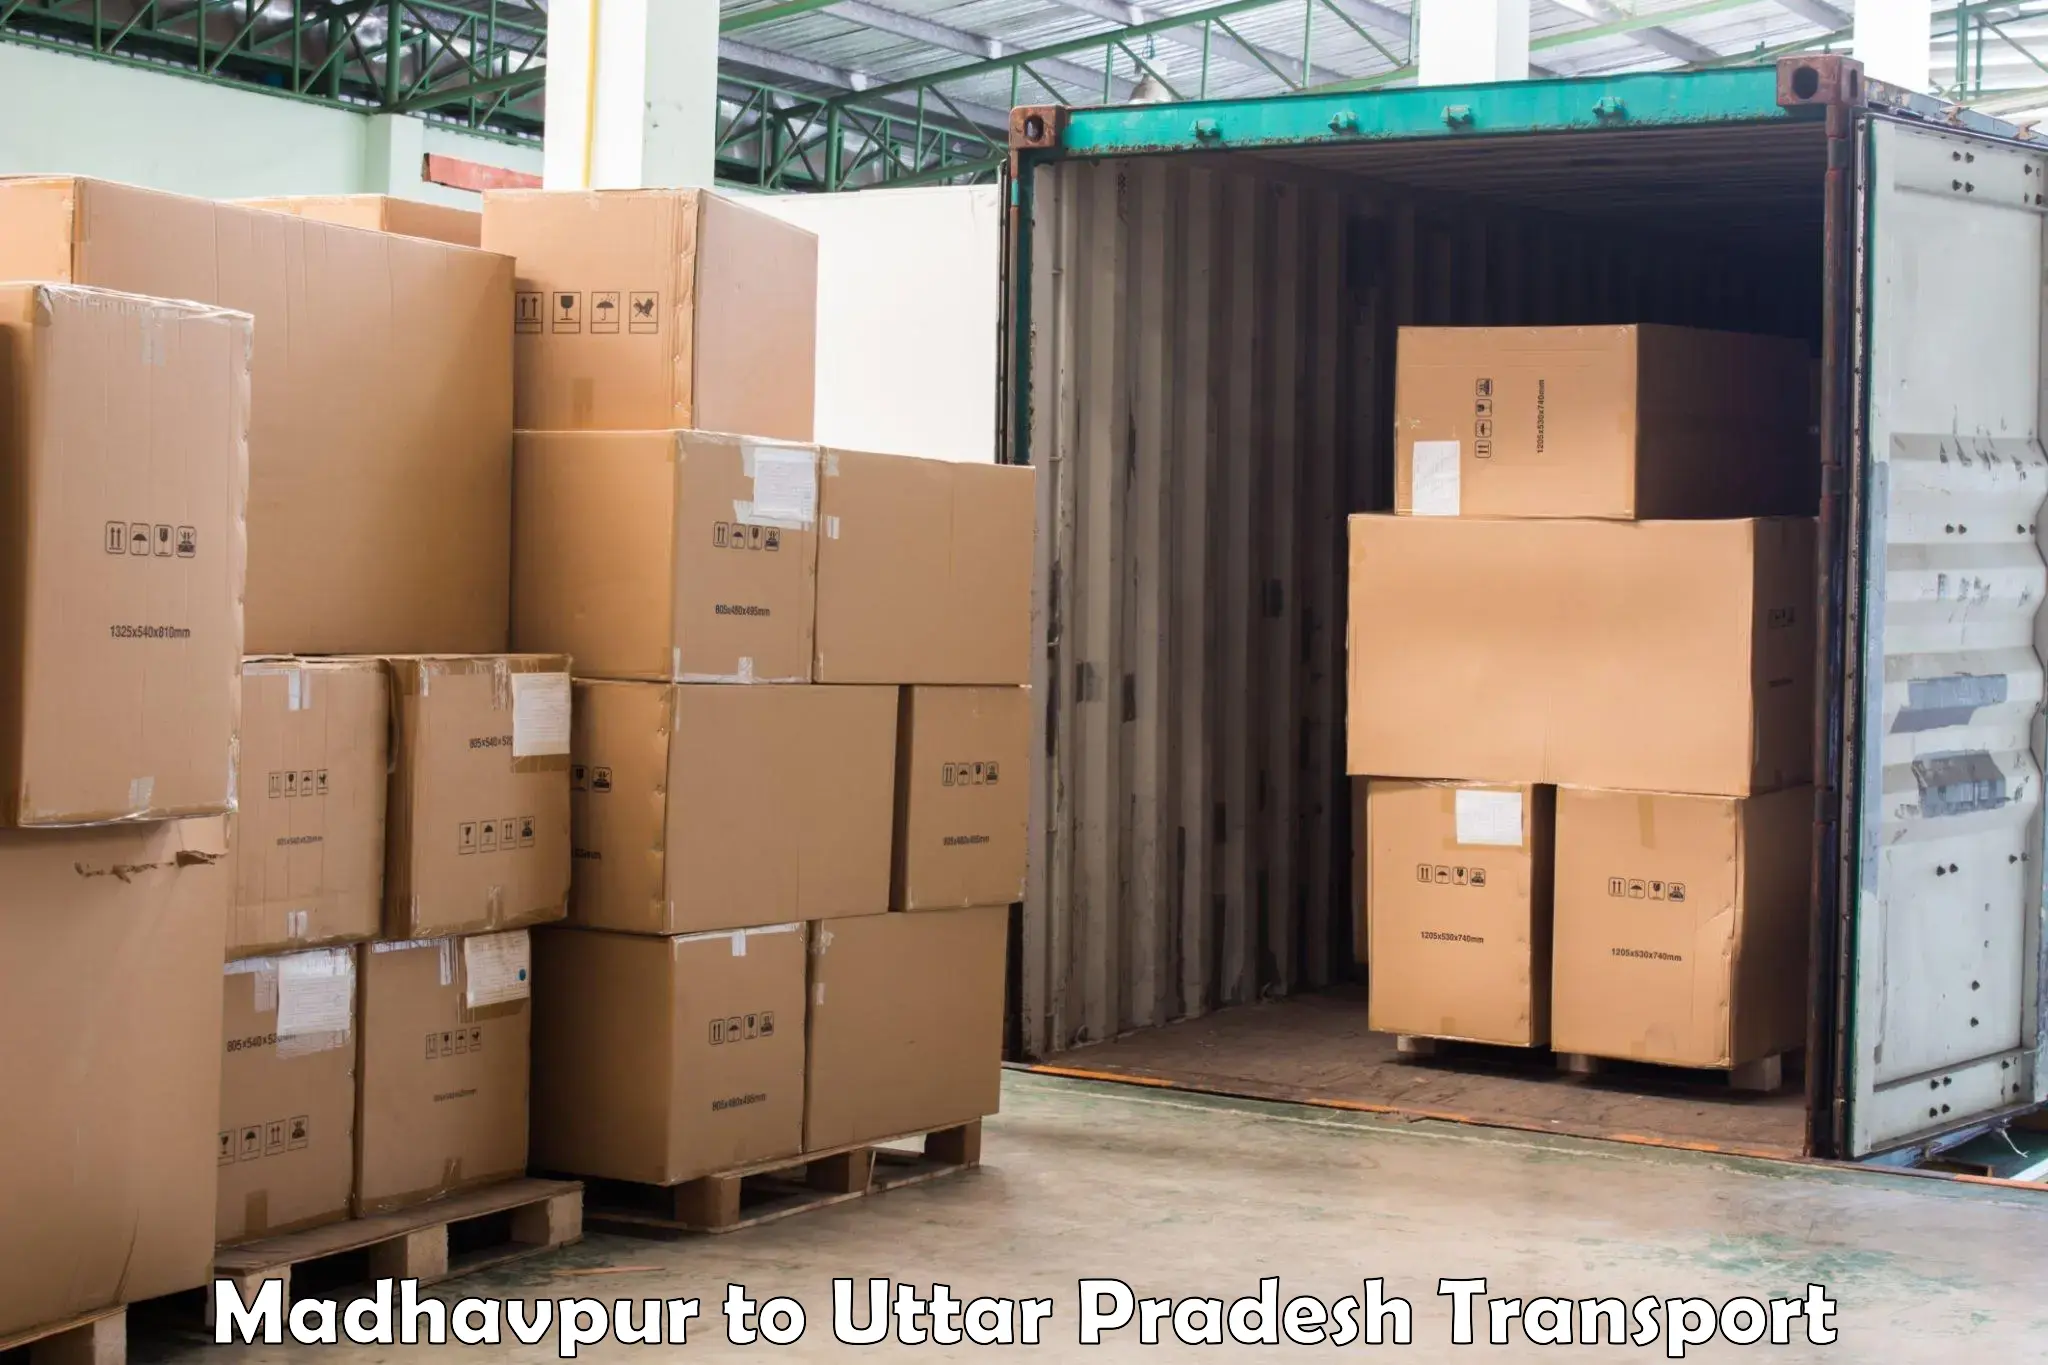 Air freight transport services Madhavpur to Khutar